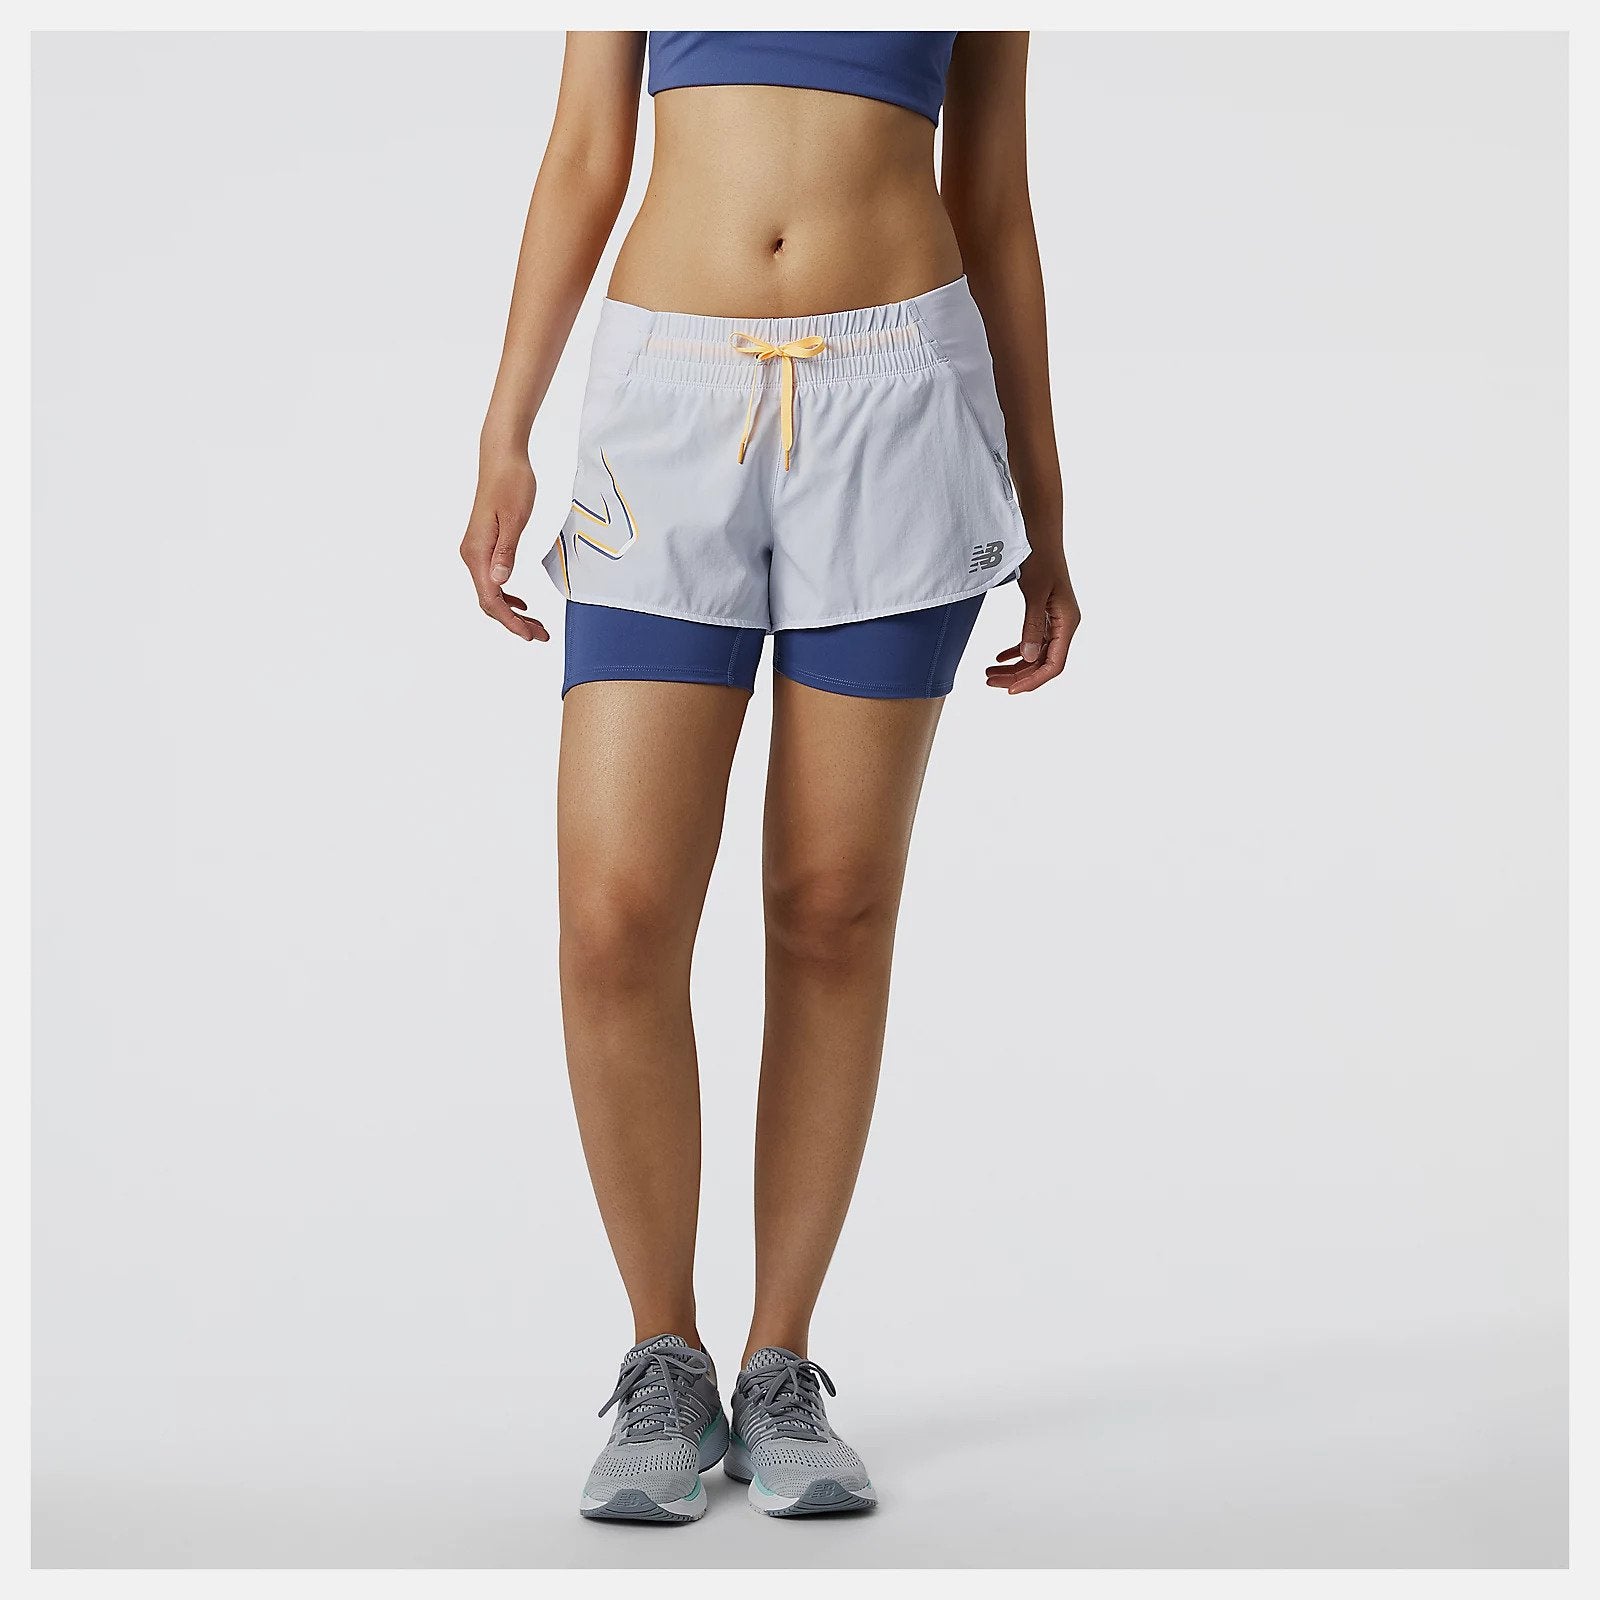 Featuring a lightweight woven shell and fitted inner short with NB DRYx wicking technology, our Printed Impact Run 2in1 Short helps you feel cool and dry on your run. These women's running shorts have a storage tunnel to thread extra layers through for a hands-free workout. Plus, a drop-in pocket on the inner fitted short offers quick access to nutrition and valuables. Finished with a print and reflective details for style